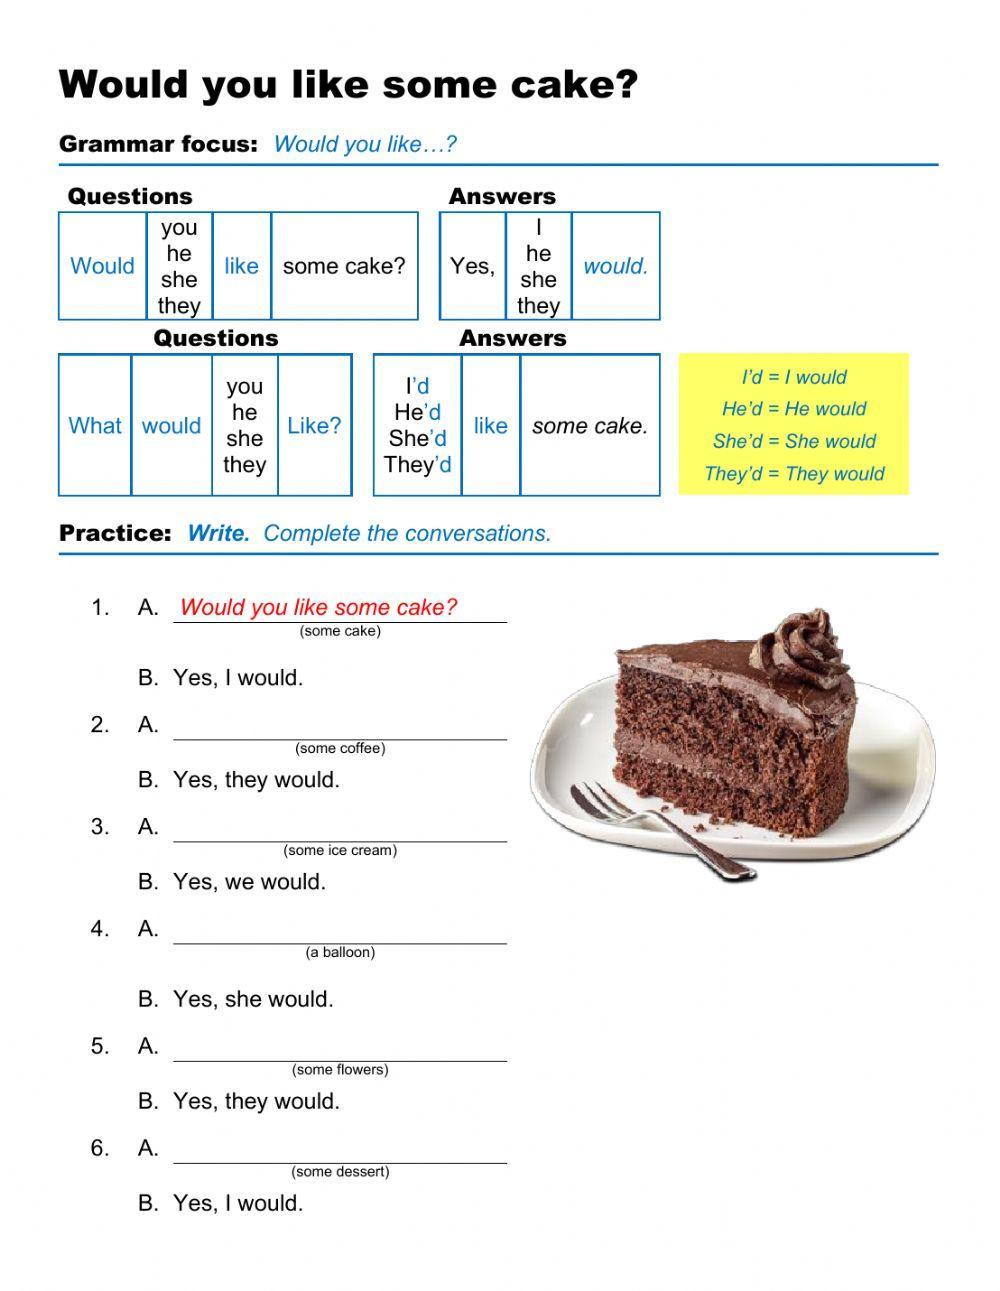 Would you like some cake? - Grammar focus 2